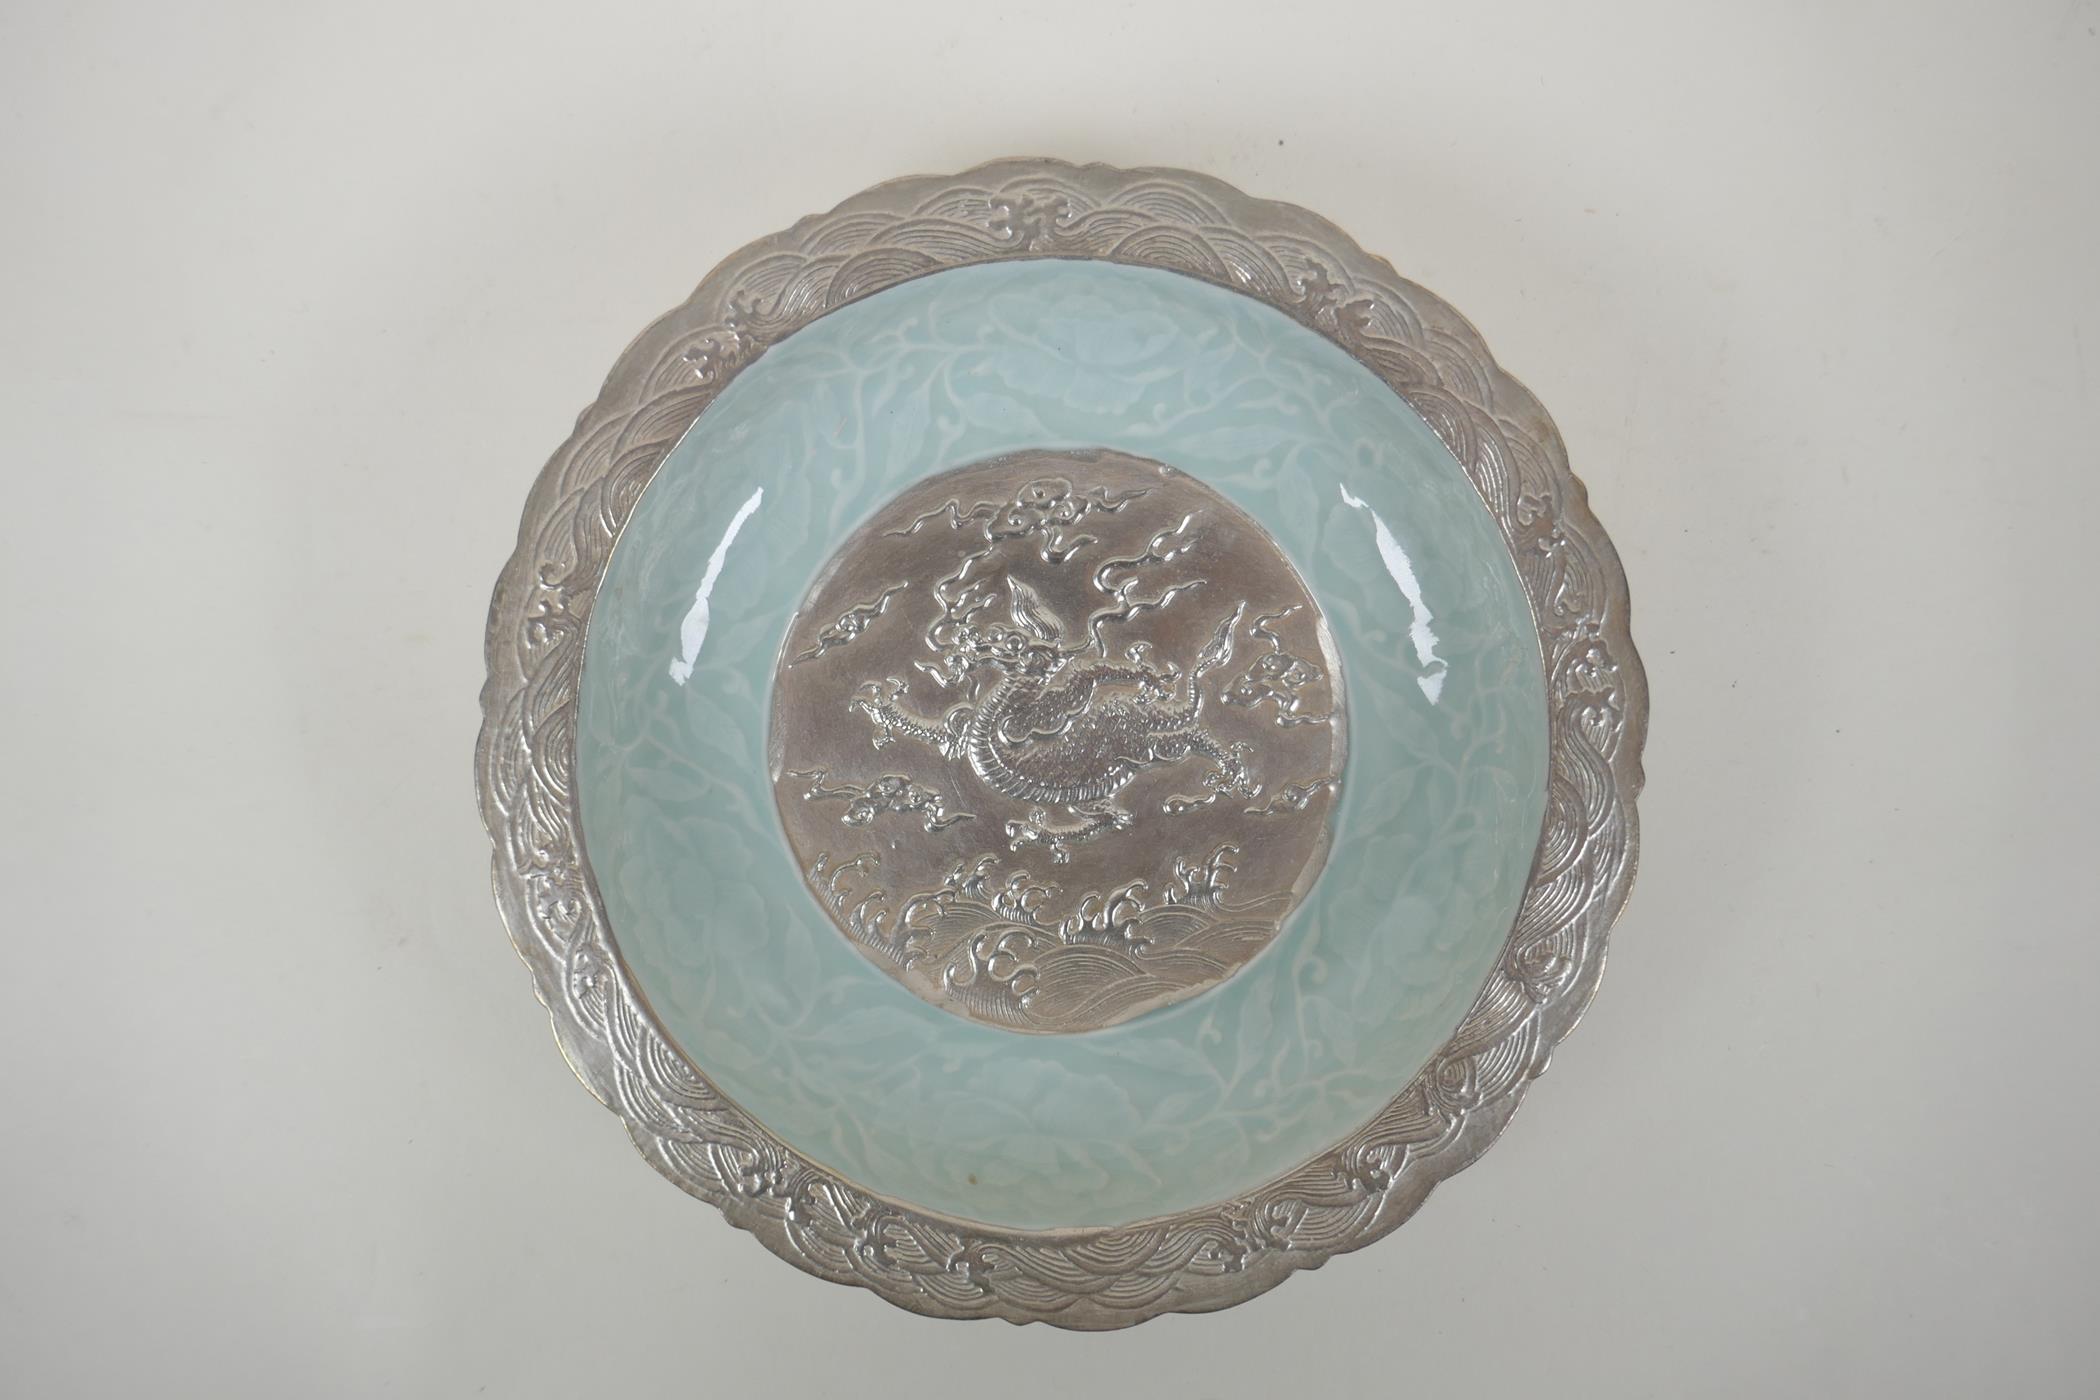 A Chinese celadon and silver glazed porcelain bowl with lobed rim, decorated with a dragon and lotus